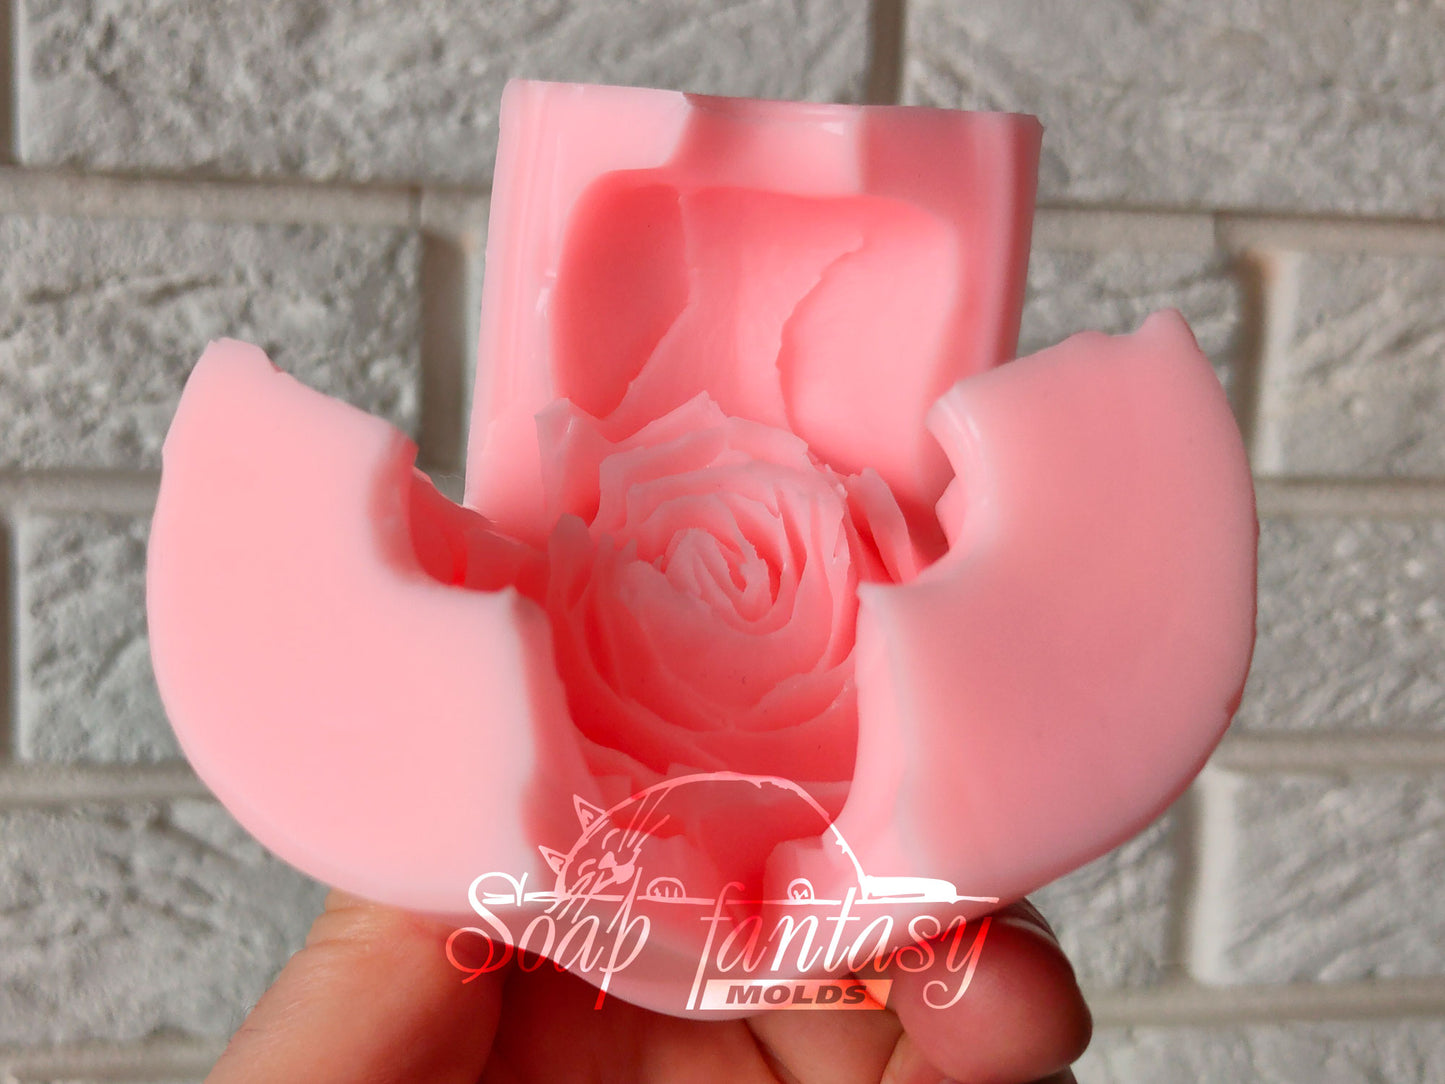 Porcelain rose #4 silicone mold for soap making